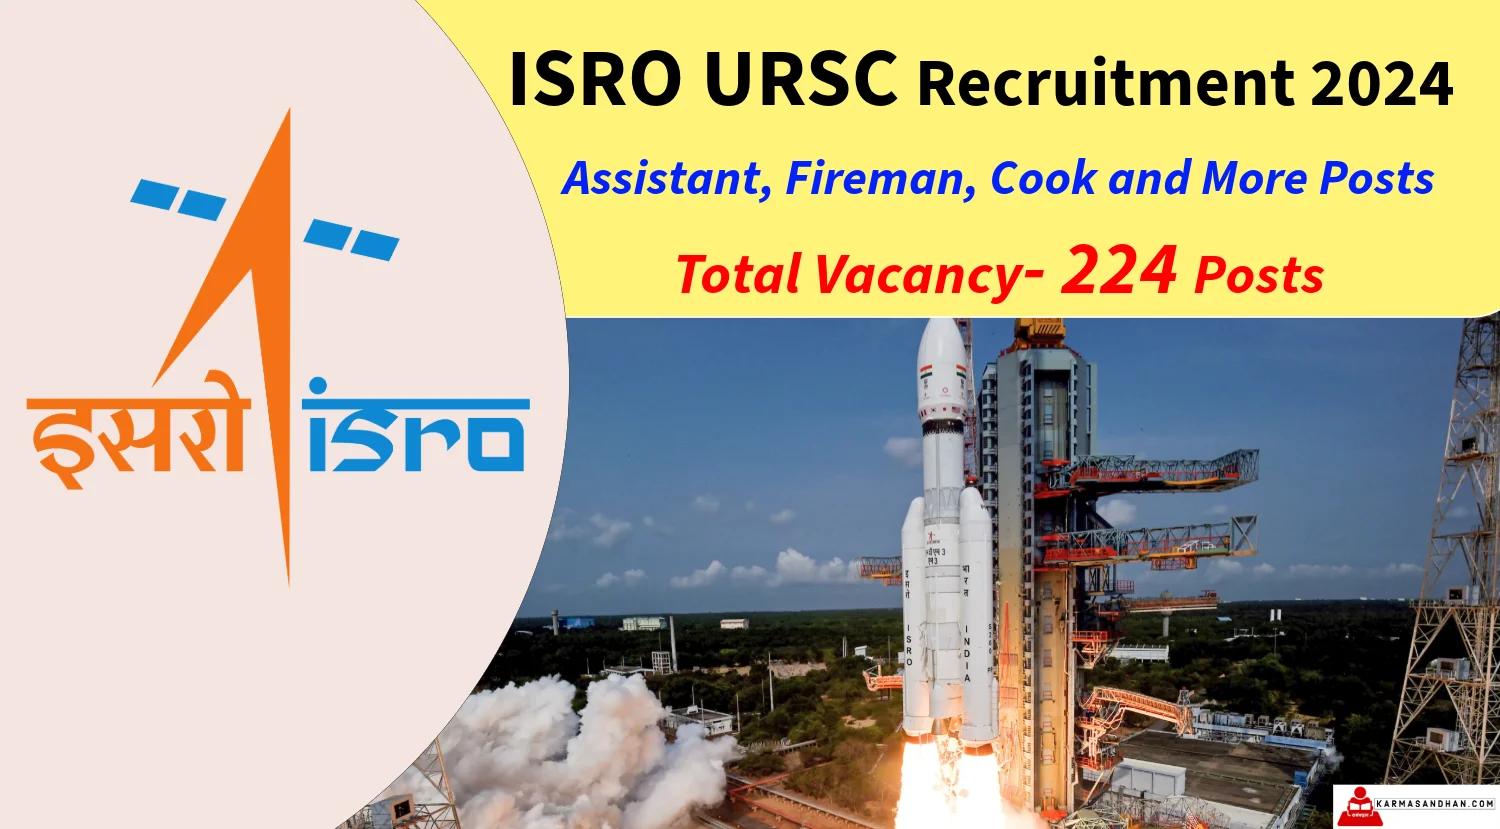 ISRO URSC Technician, Assistant, Fireman, Cook and More Recruitment 2024 Notification Out for 224 Posts